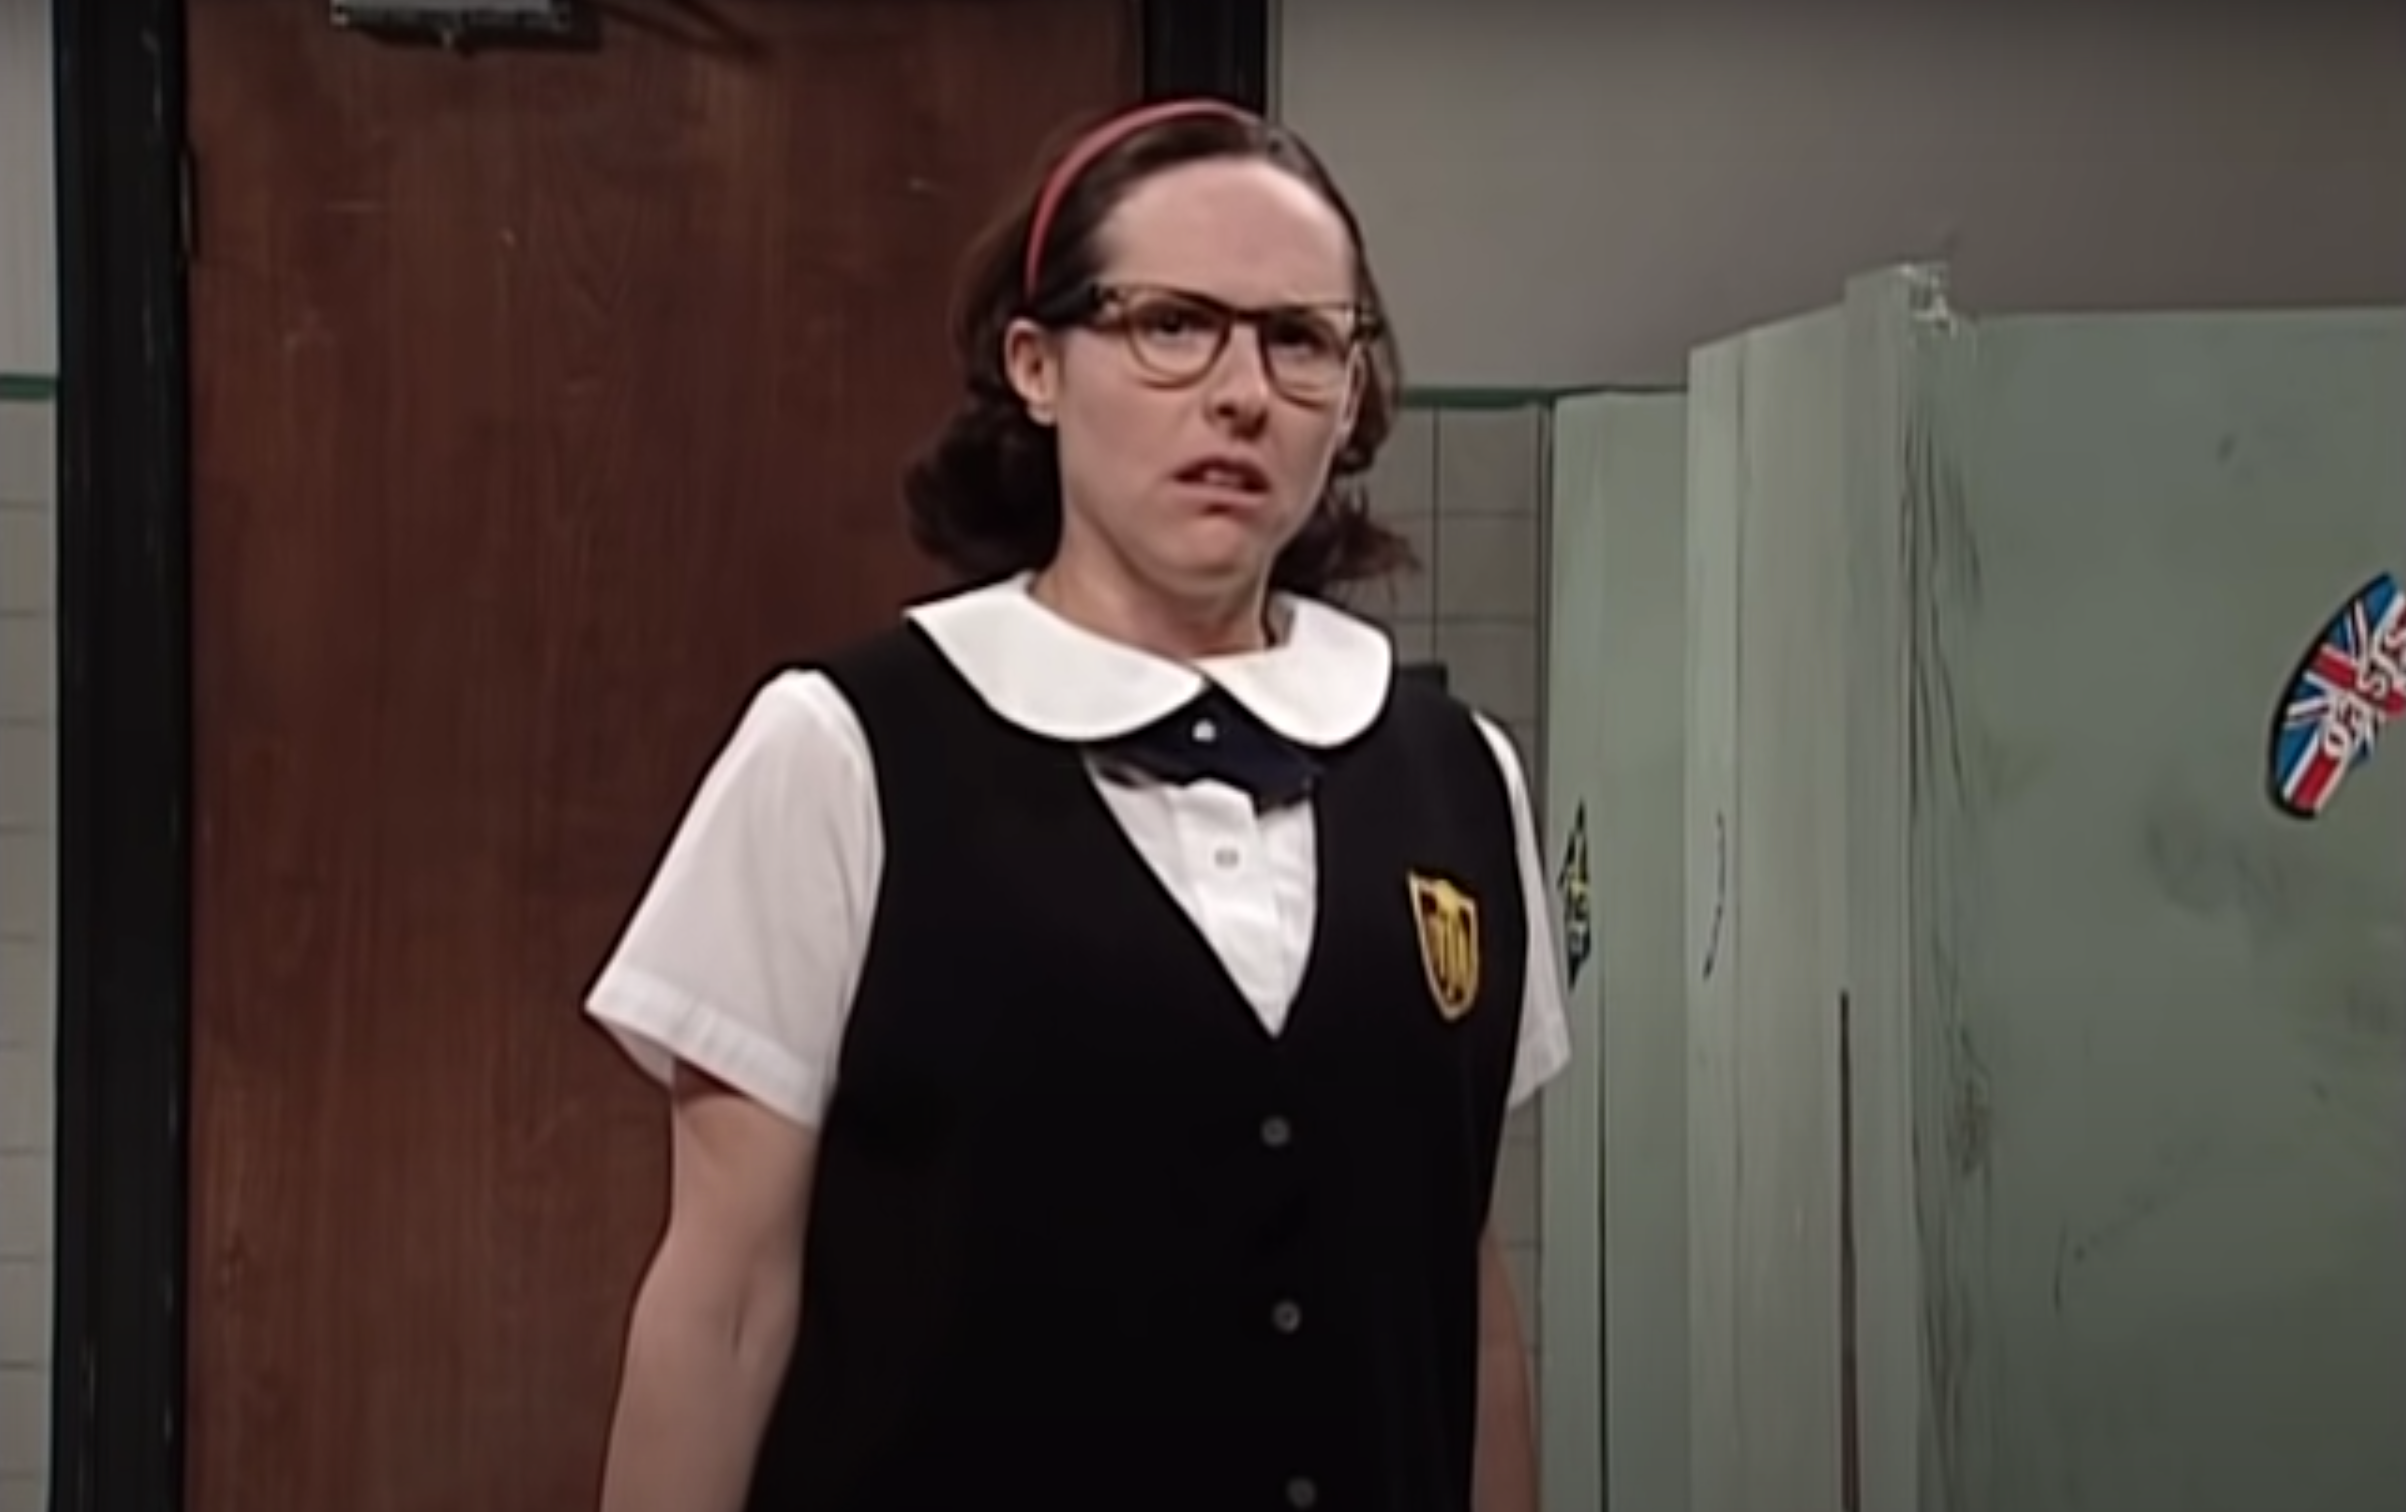 Molly Shannon details how her tragic childhood inspired her SNL character Mary Katherine Gallagher